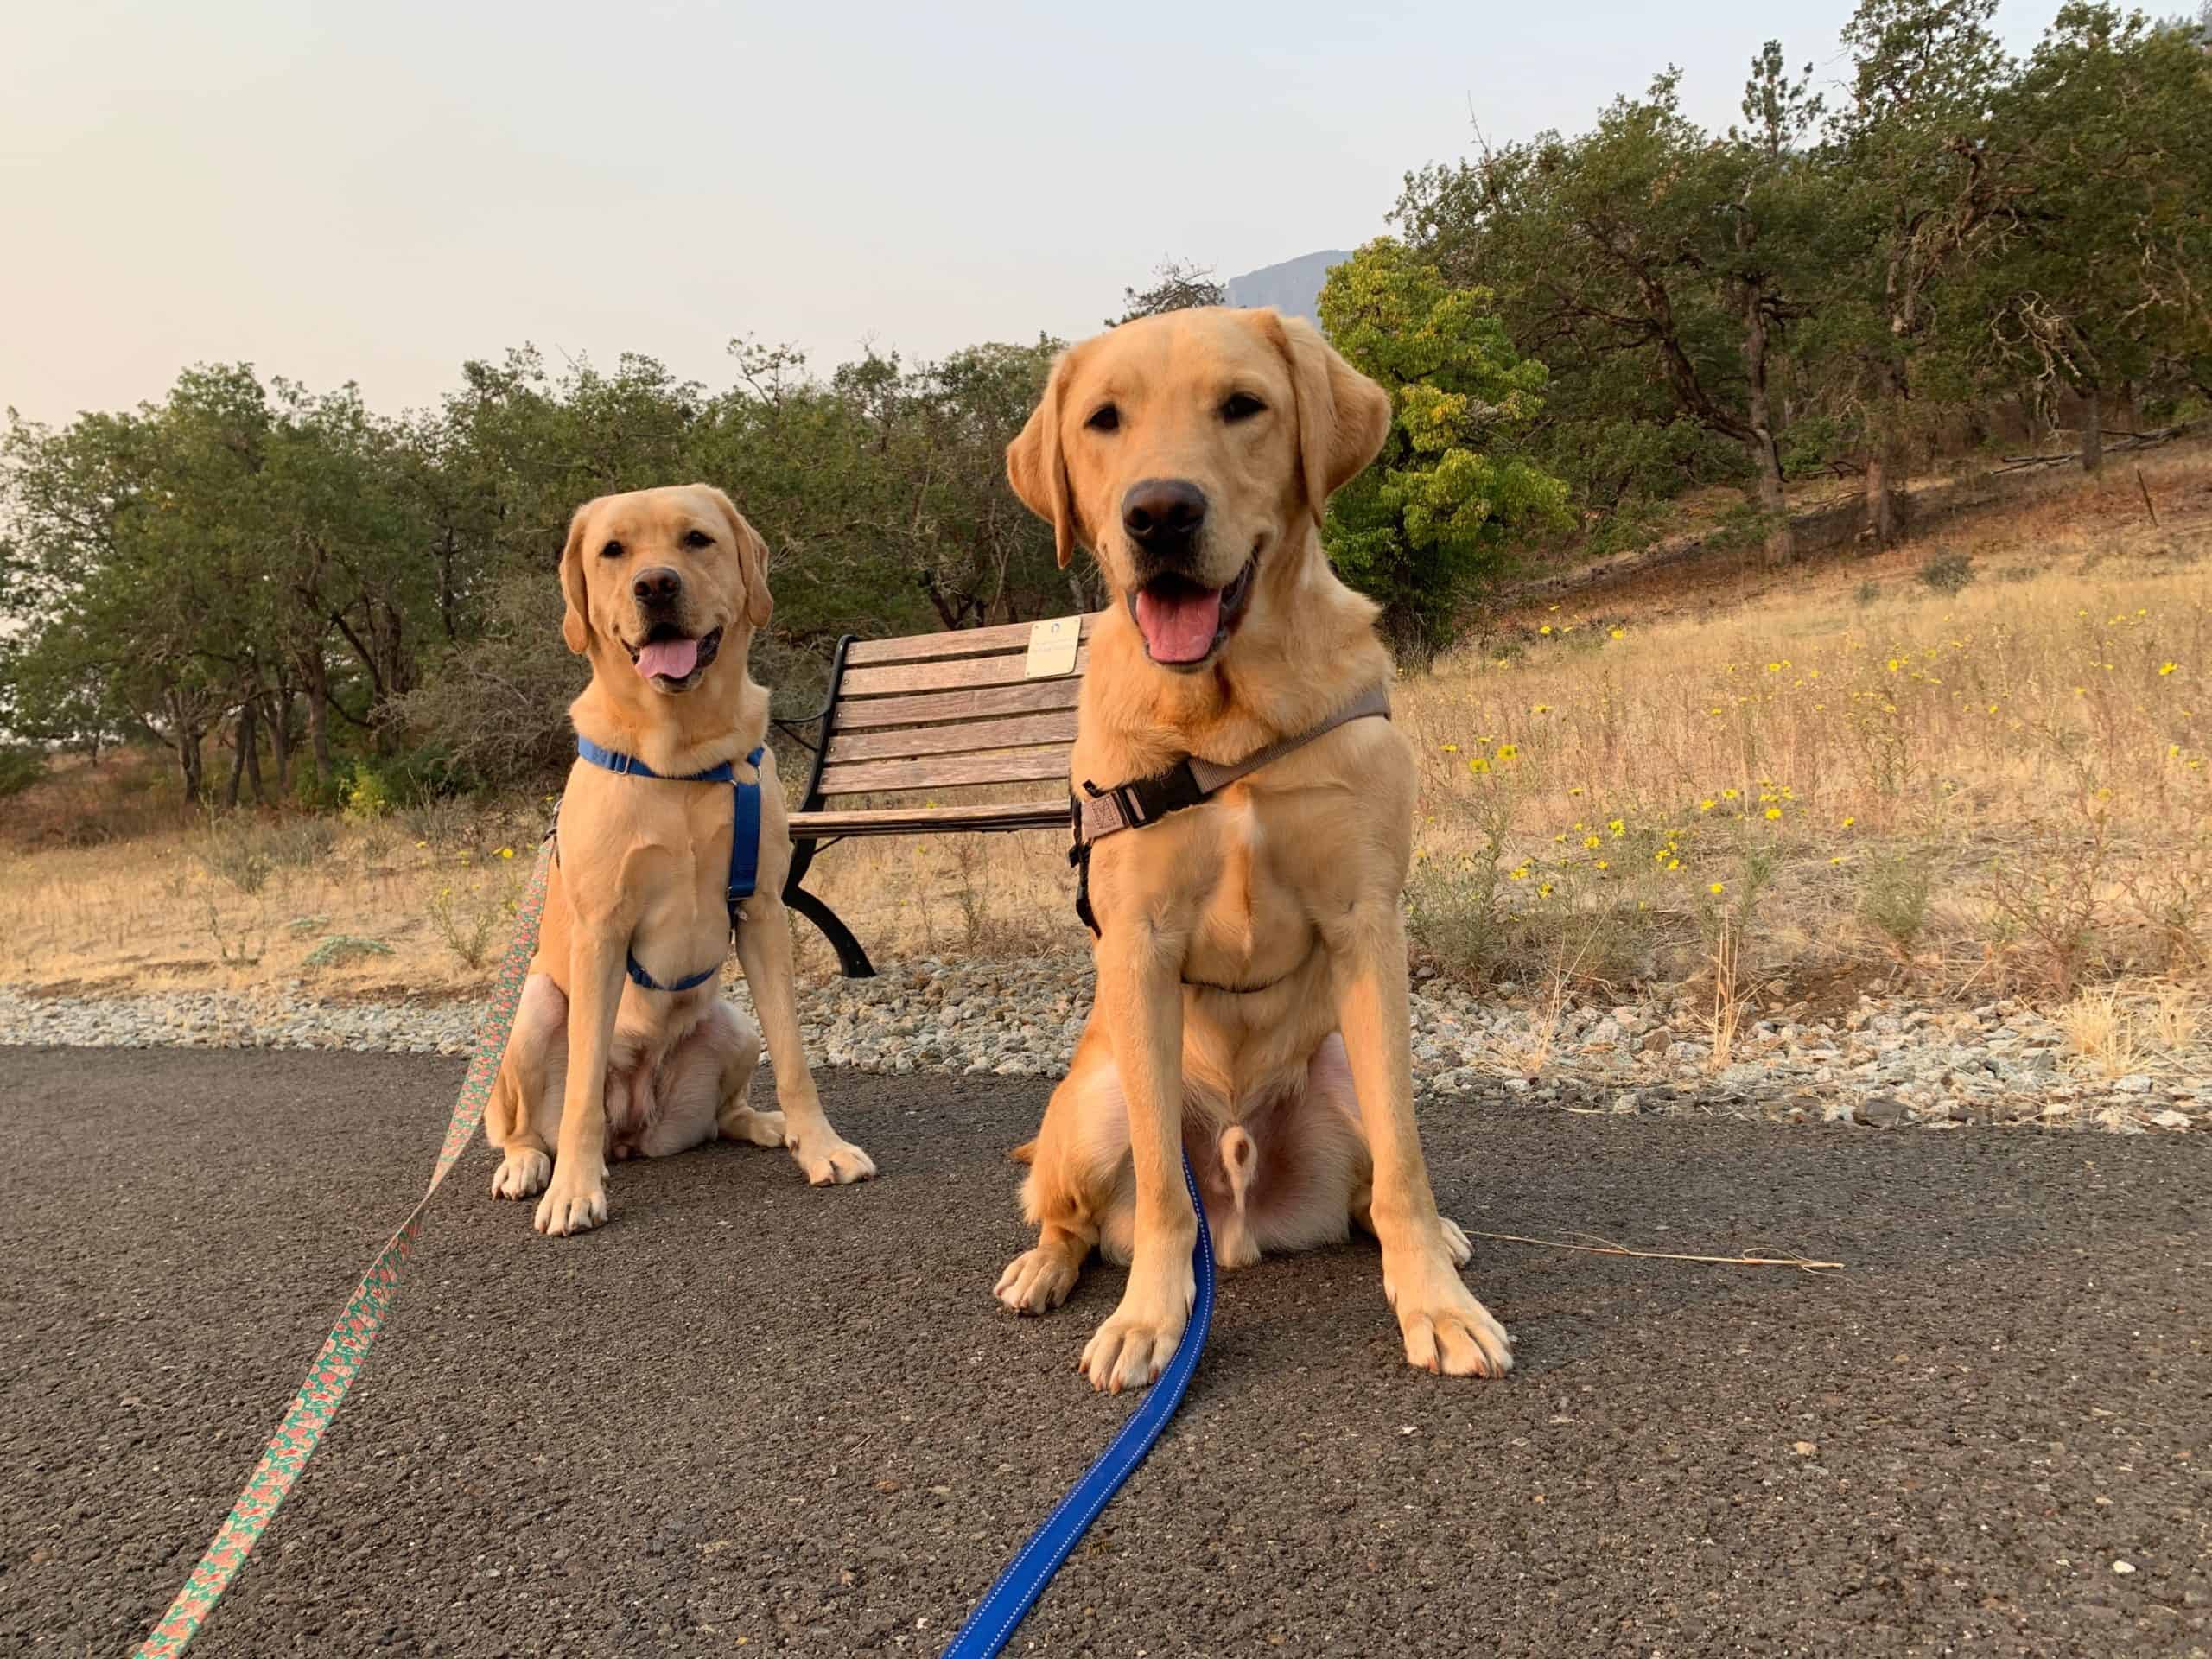 Two Assistance Dogs in Training outside on a hazy day